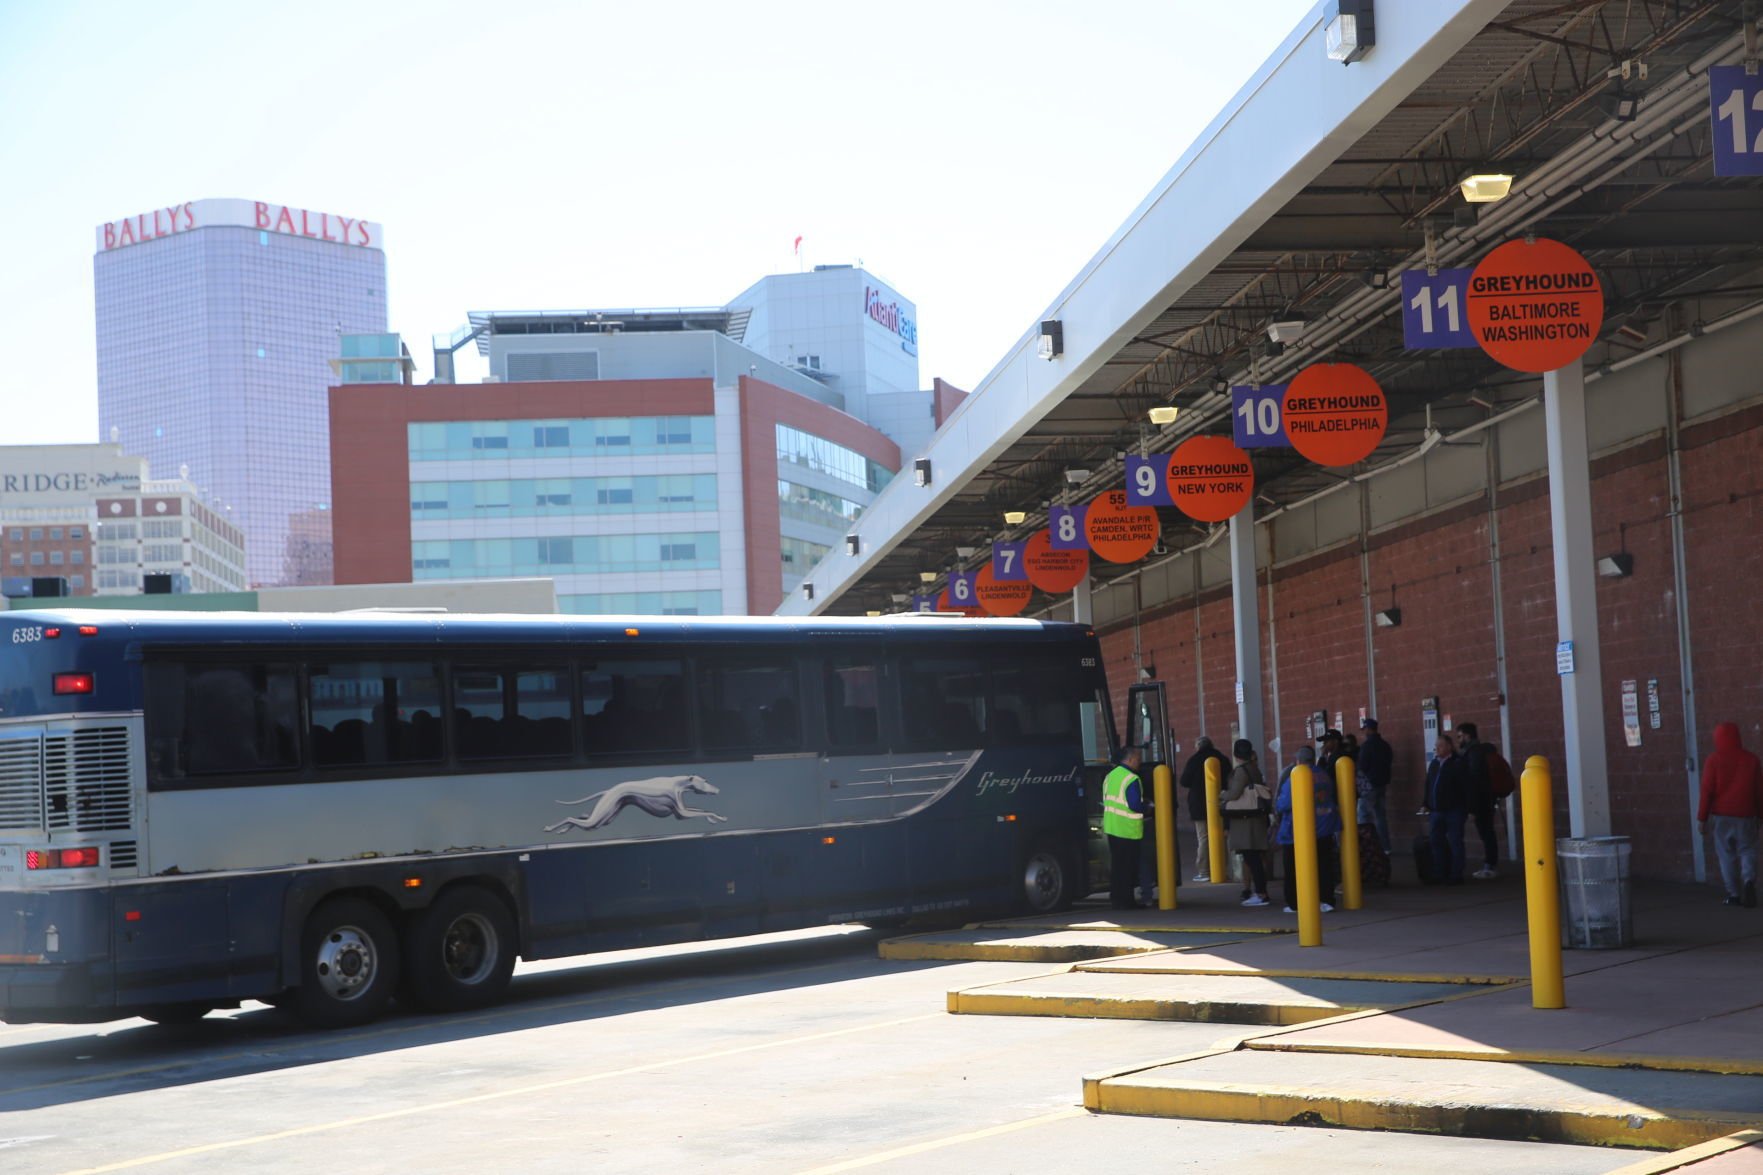 casino buses to atlantic city from nyc